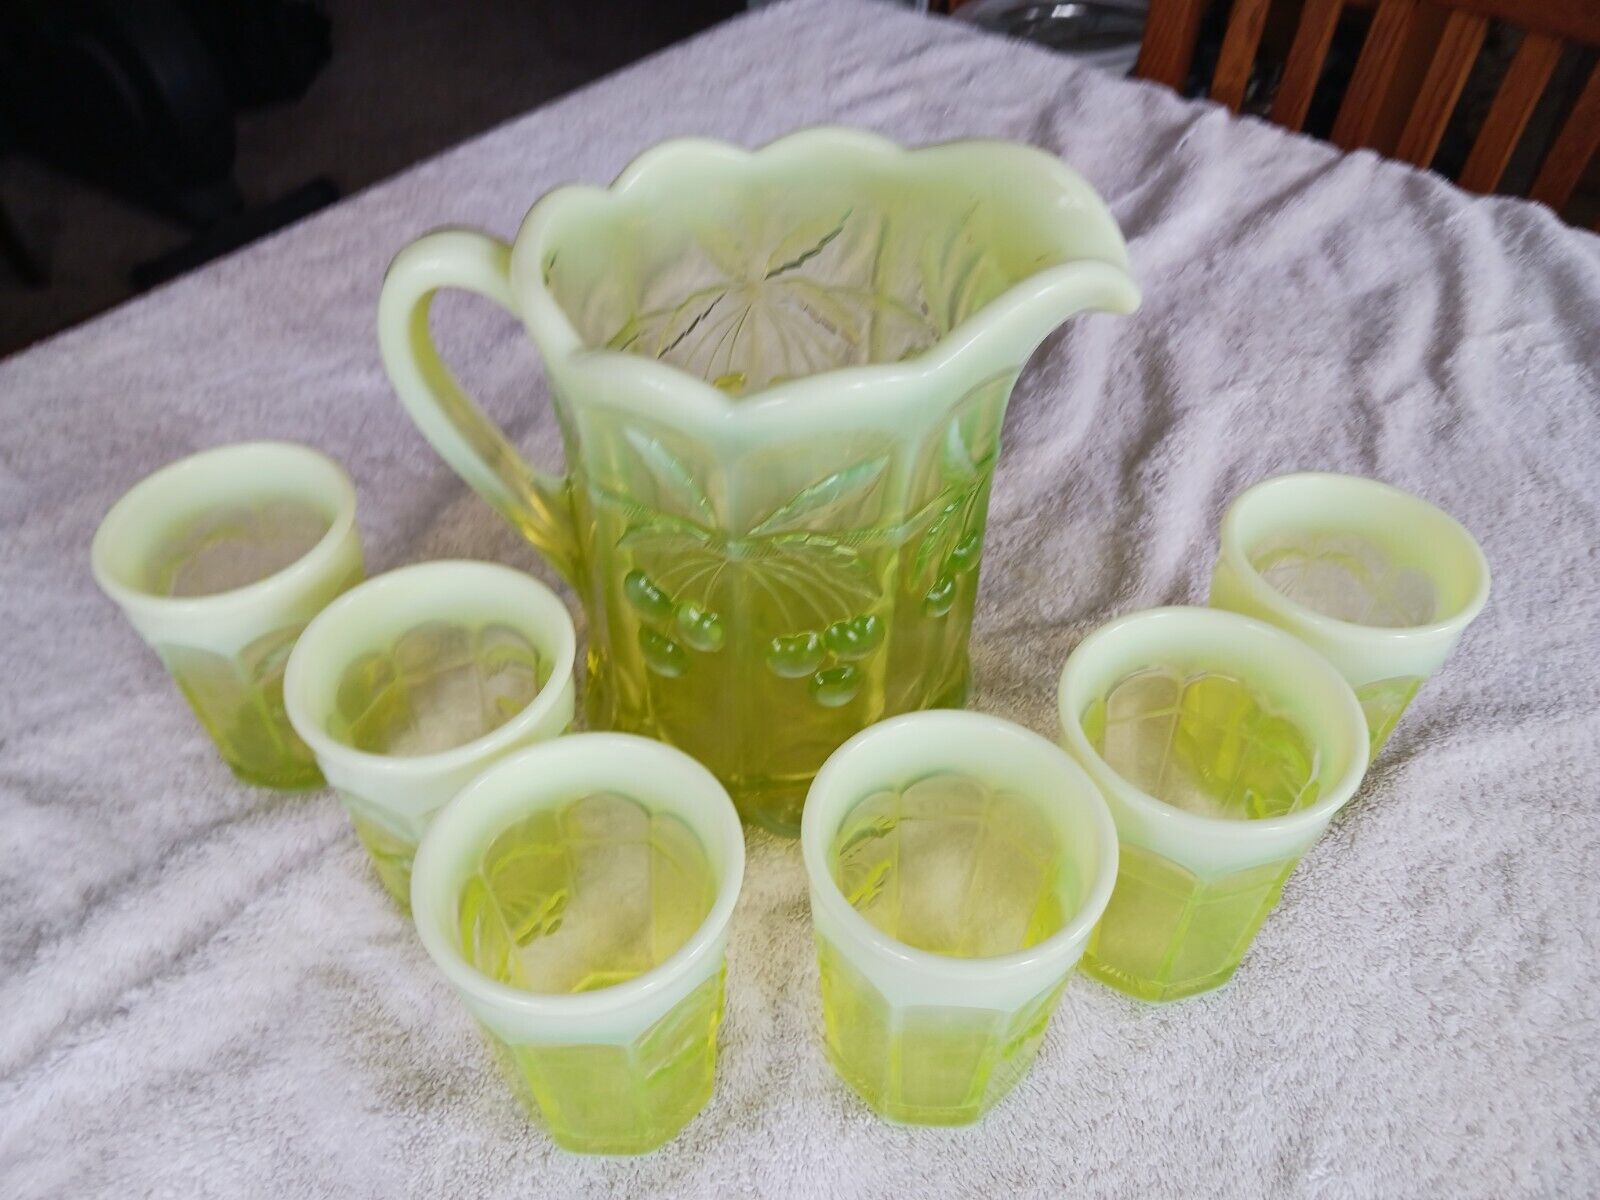  Vaseline Opalescent Glass Water Pitcher & 6 Glasses Cherry  Cable Mosser